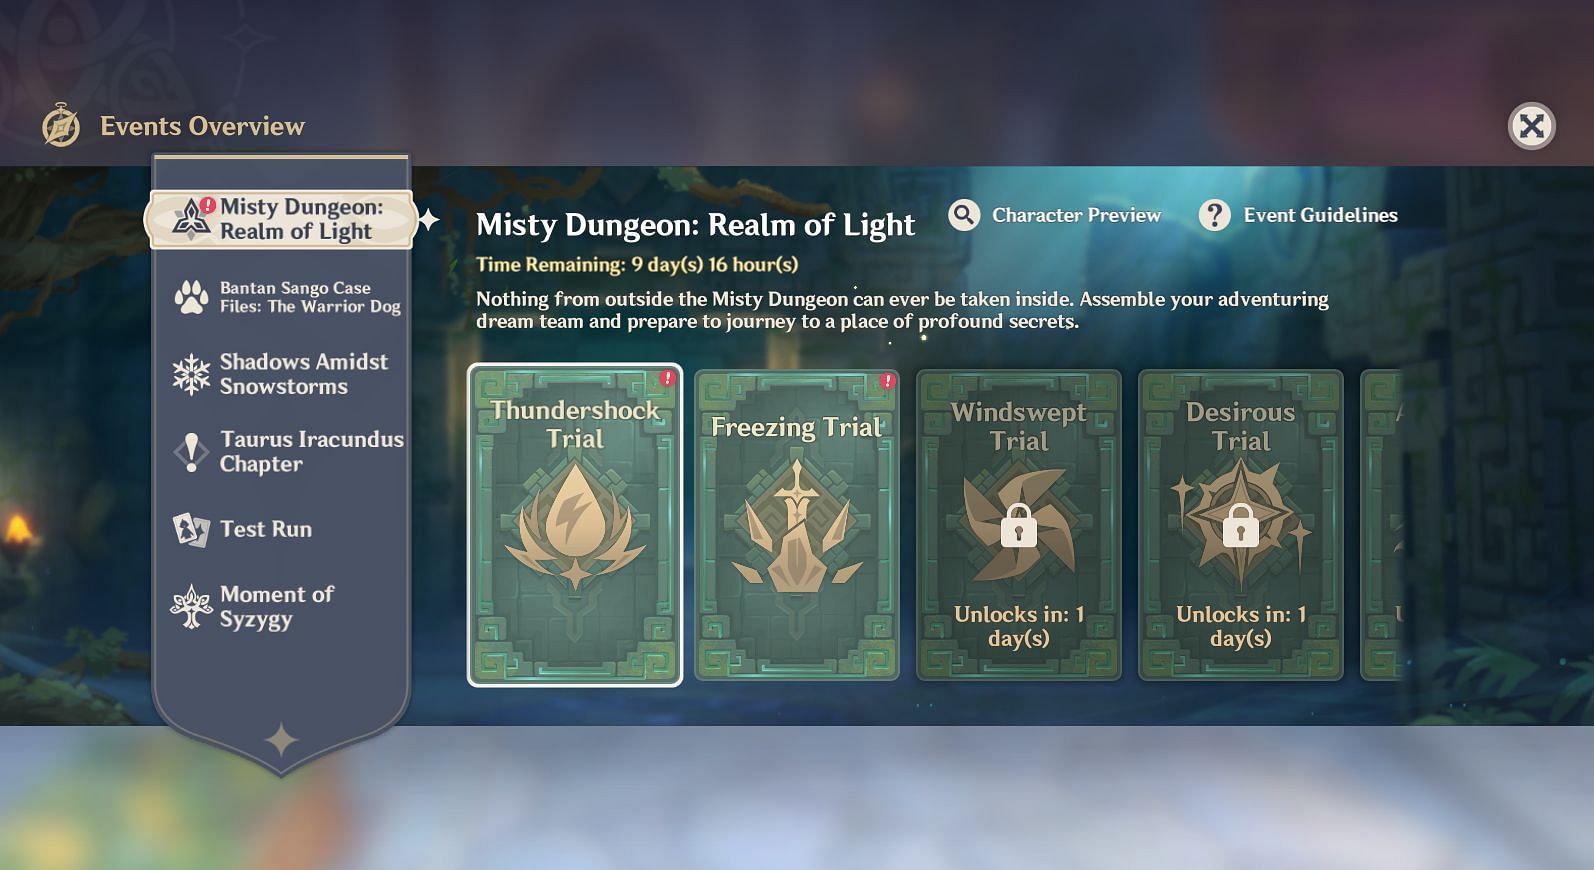 The Misty Dungeon: Realm of Light event page (Image via Genshin Impact)